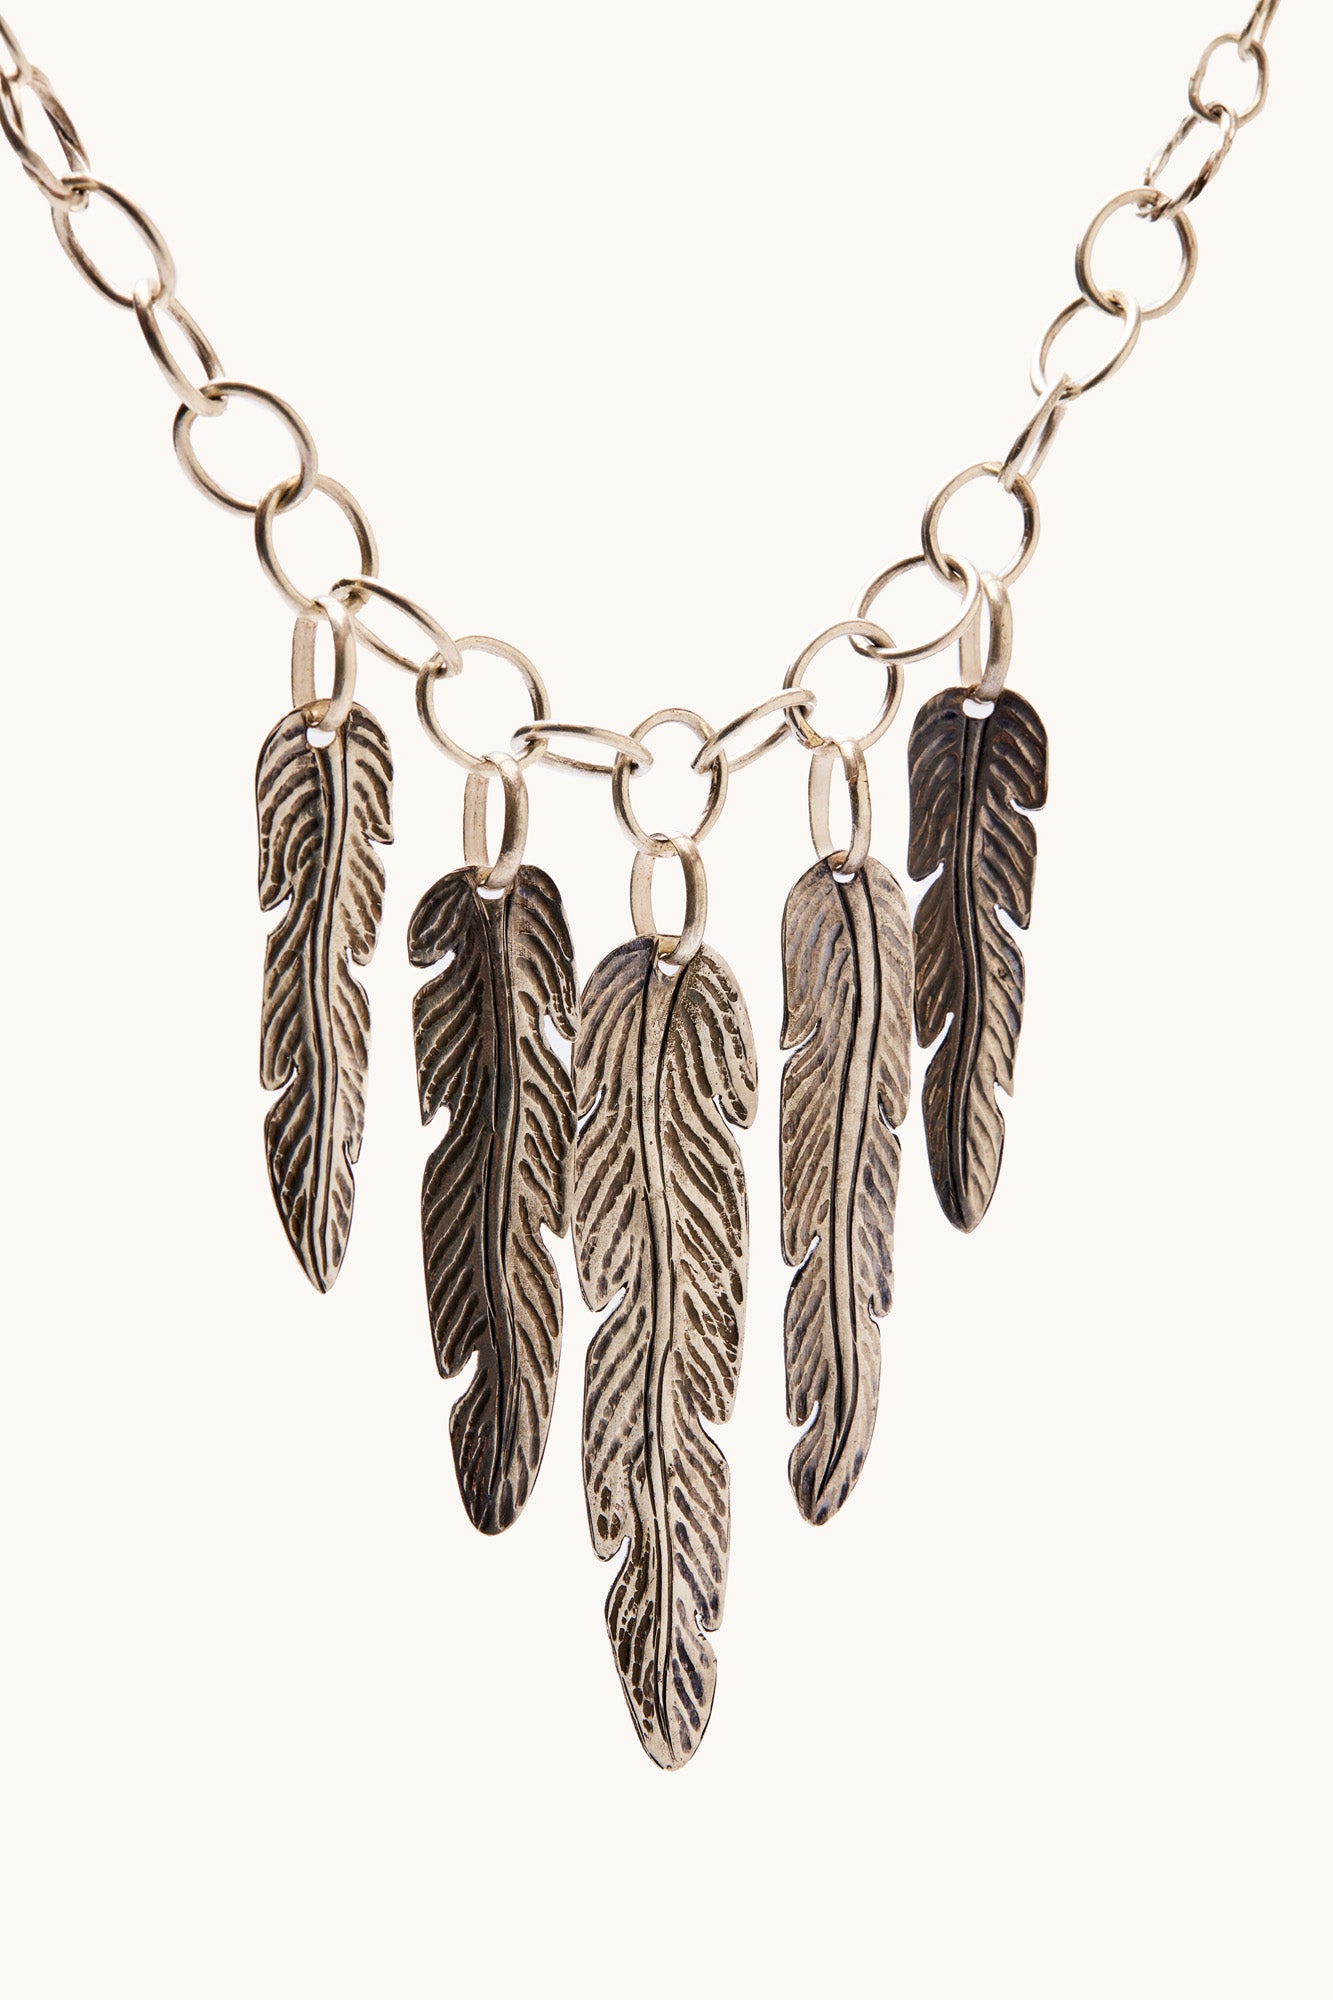 5 Feathers Necklace